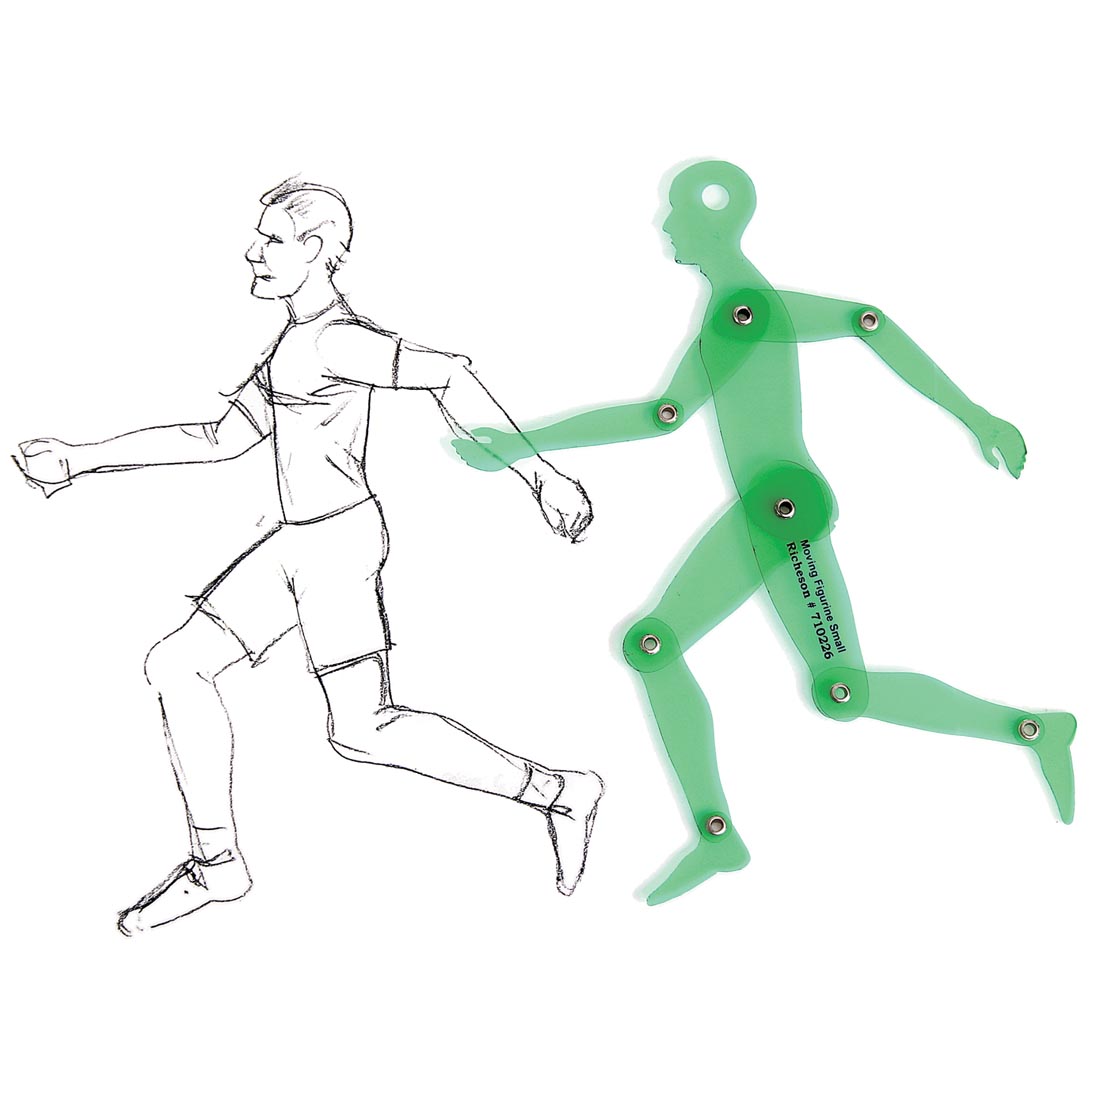 Moving Figurine Template beside a drawing of a man